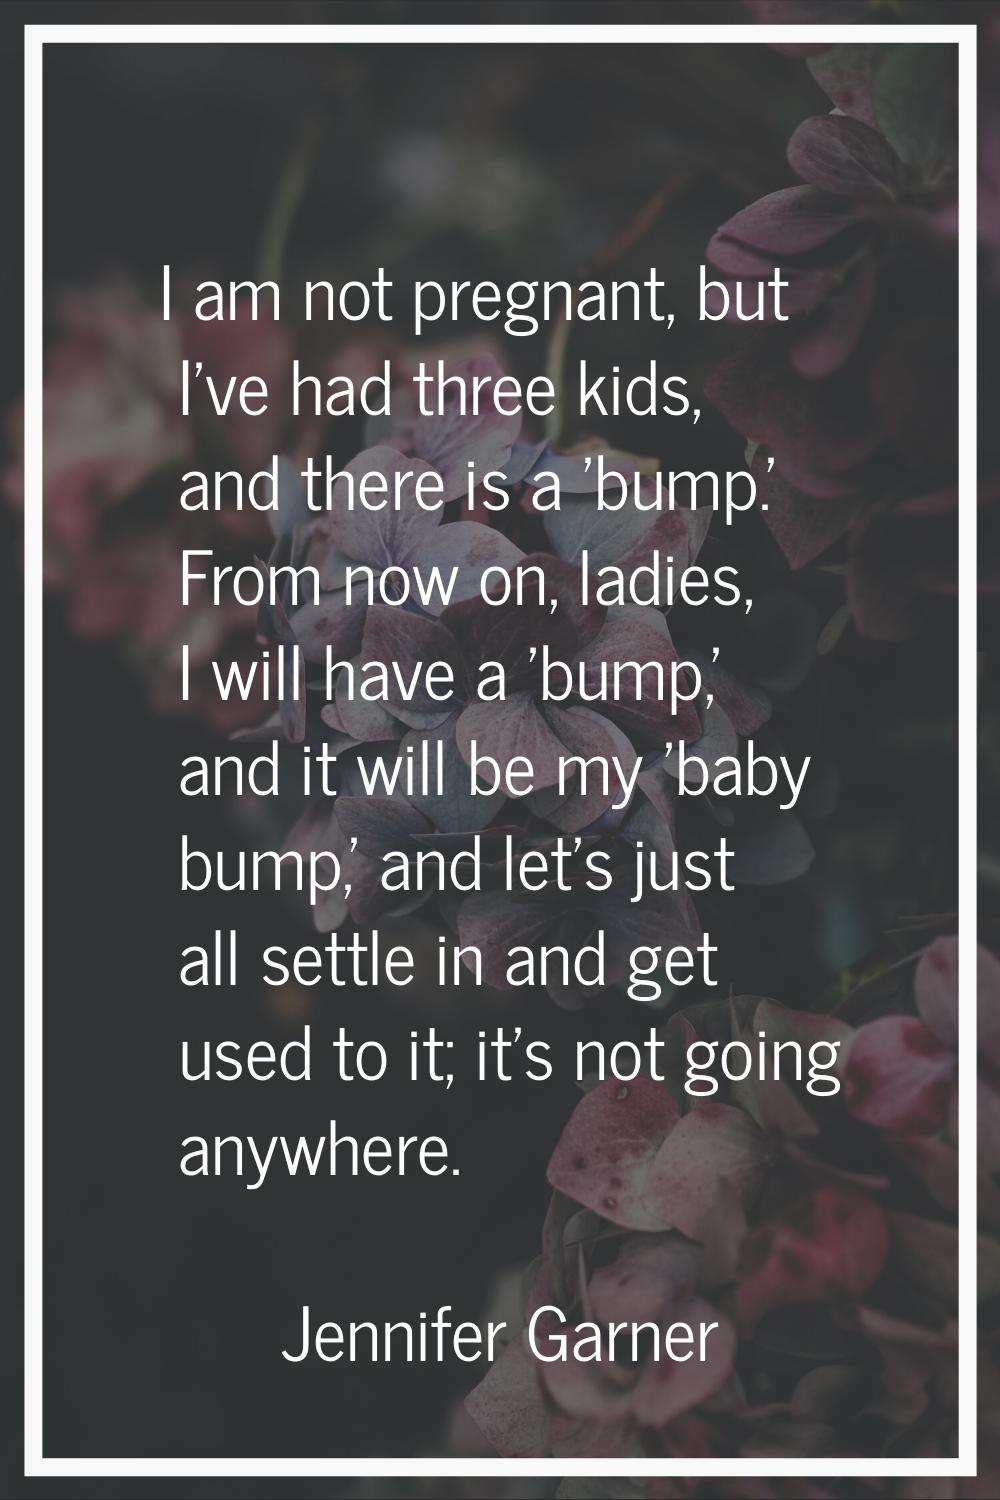 I am not pregnant, but I've had three kids, and there is a 'bump.' From now on, ladies, I will have